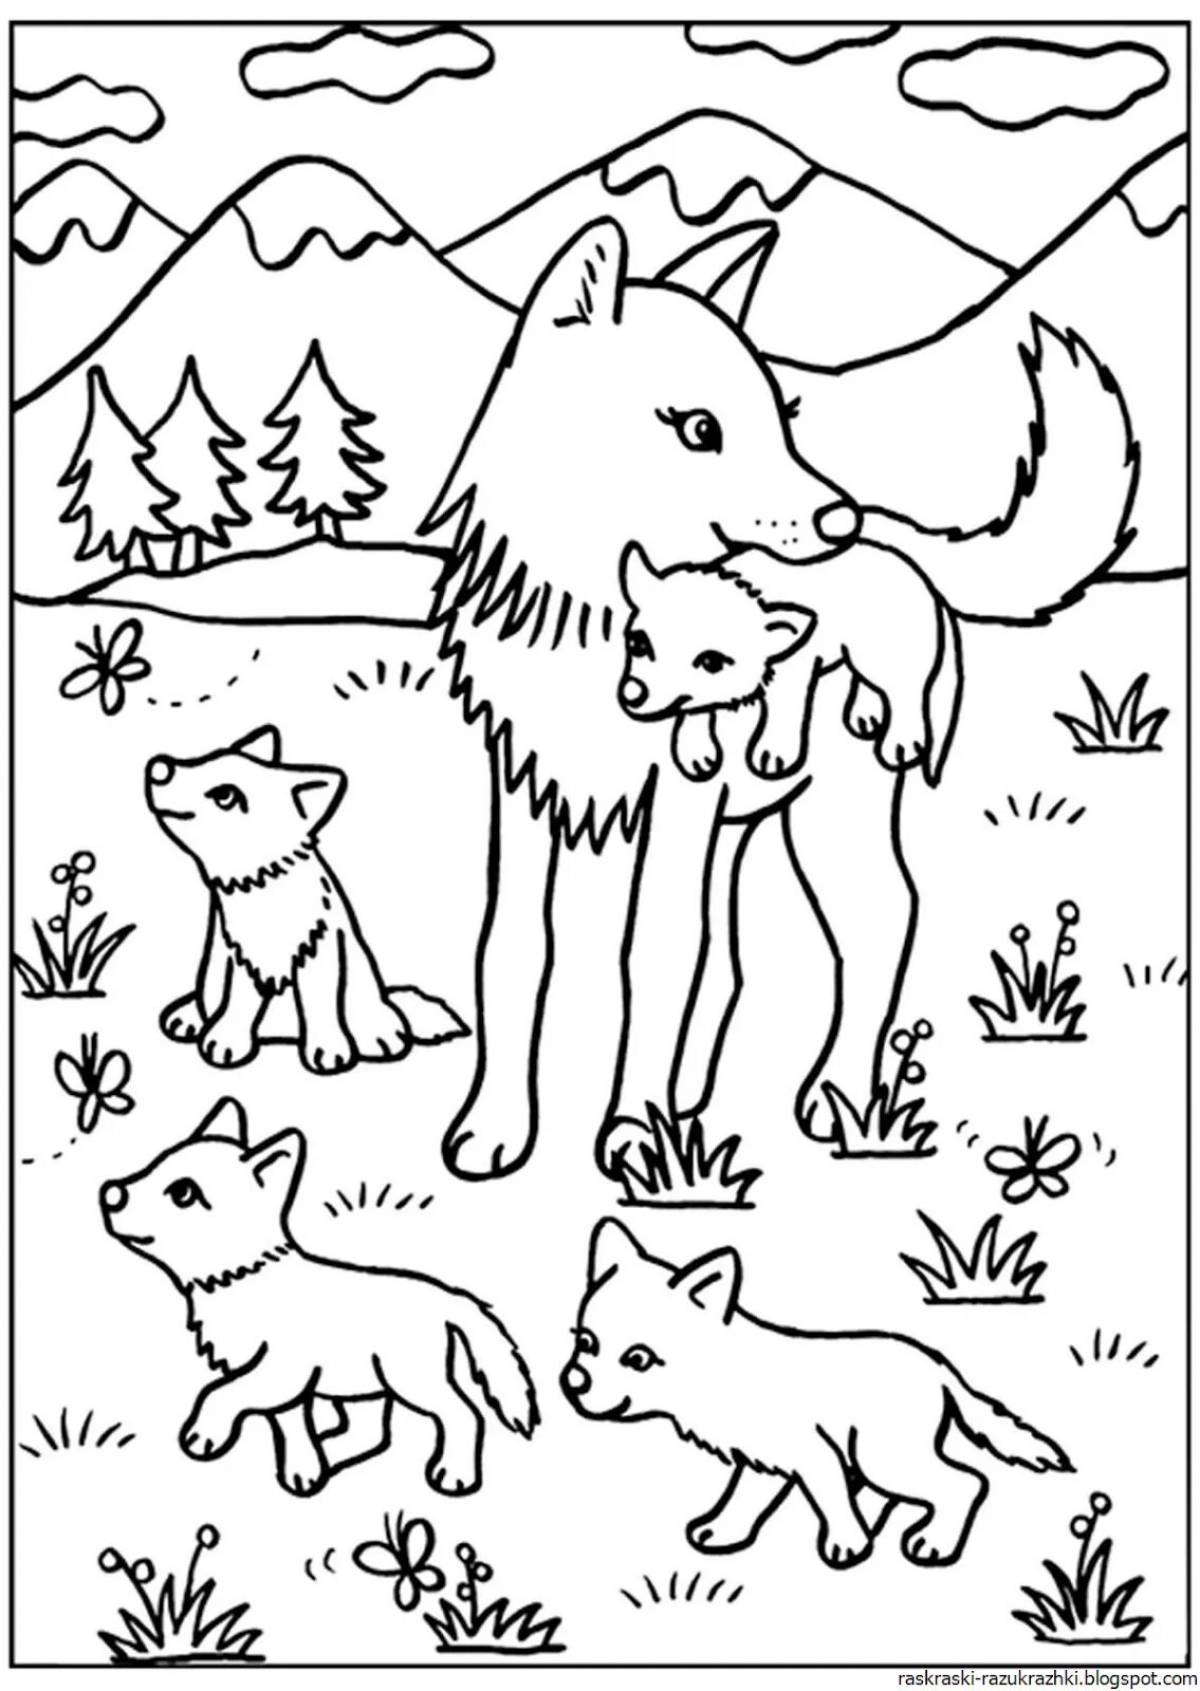 Majestic Wild Animals Coloring Pages for Preschoolers